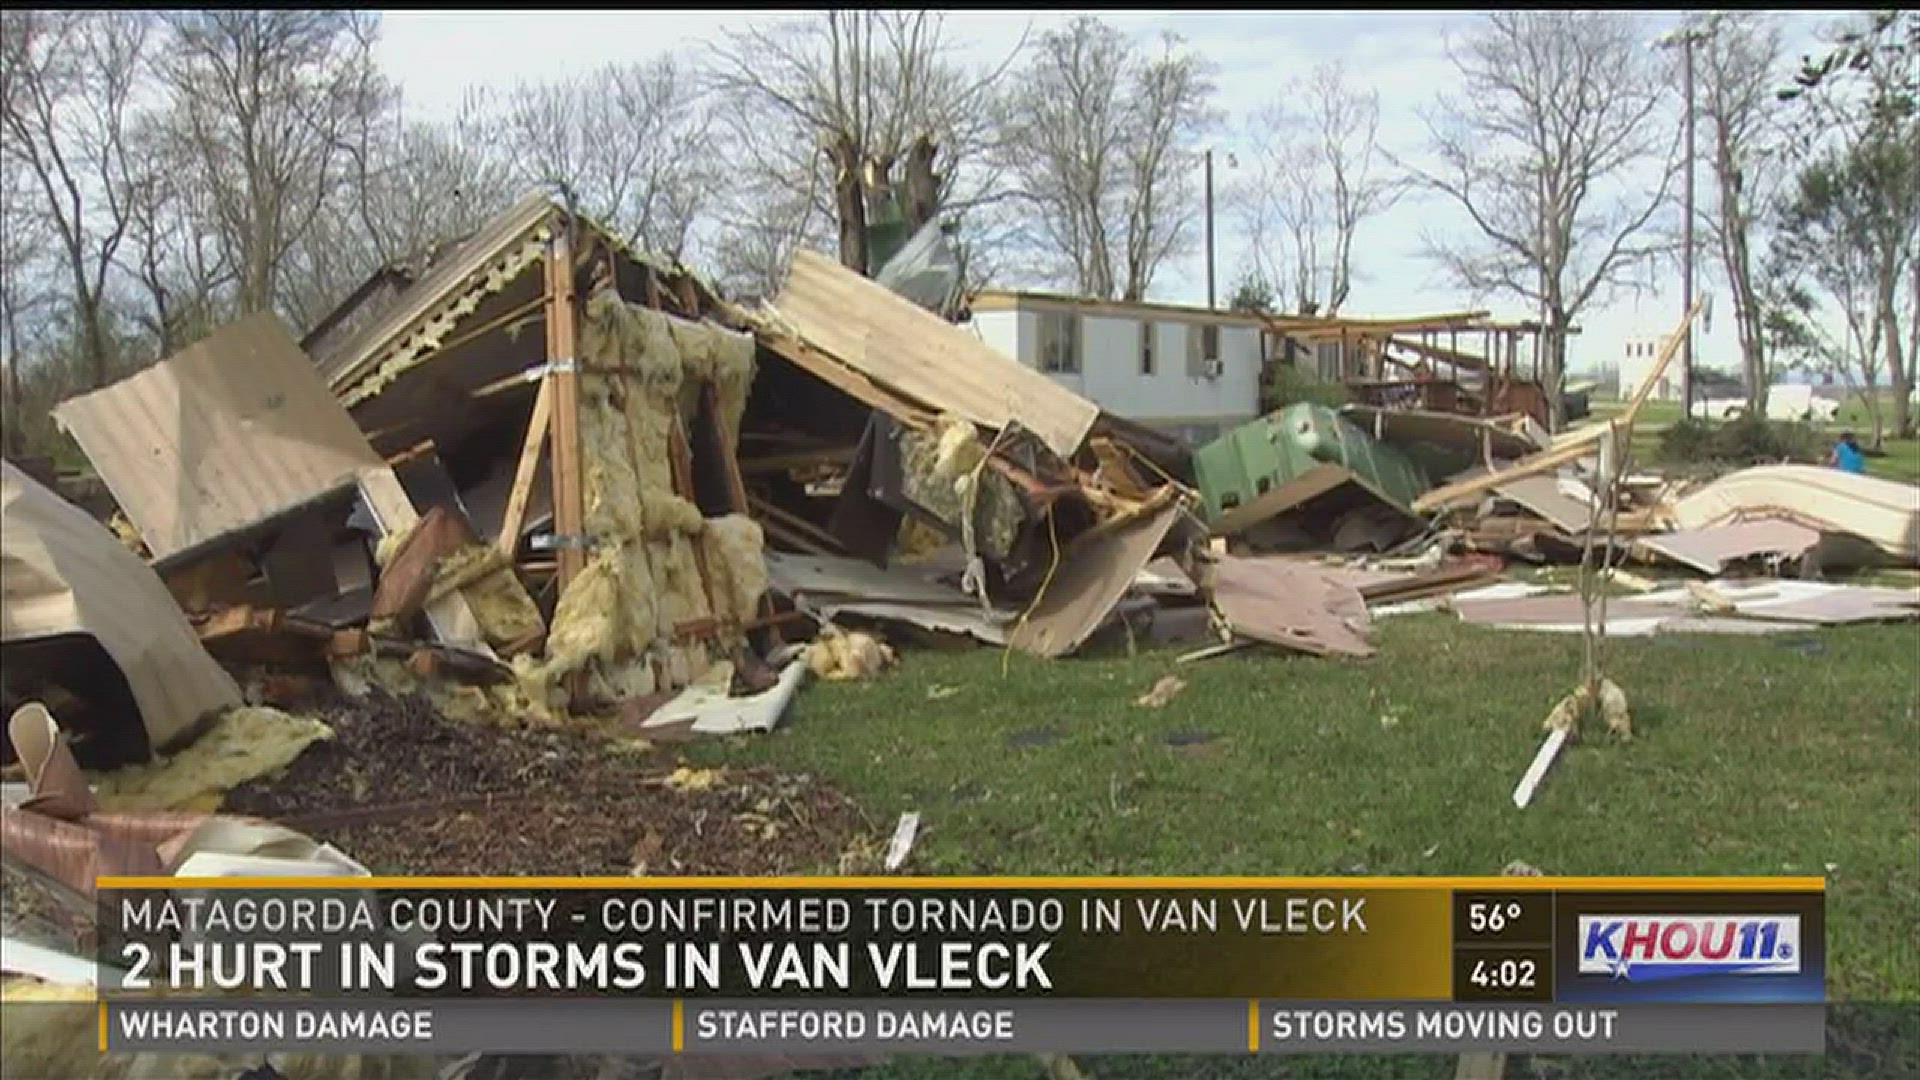 The tiny town of  Van Vleck, in Matagorda County, was among the hardest hit areas. Six people were hurt  when an EF-1 tornado touched down, according to the National Weather Service.